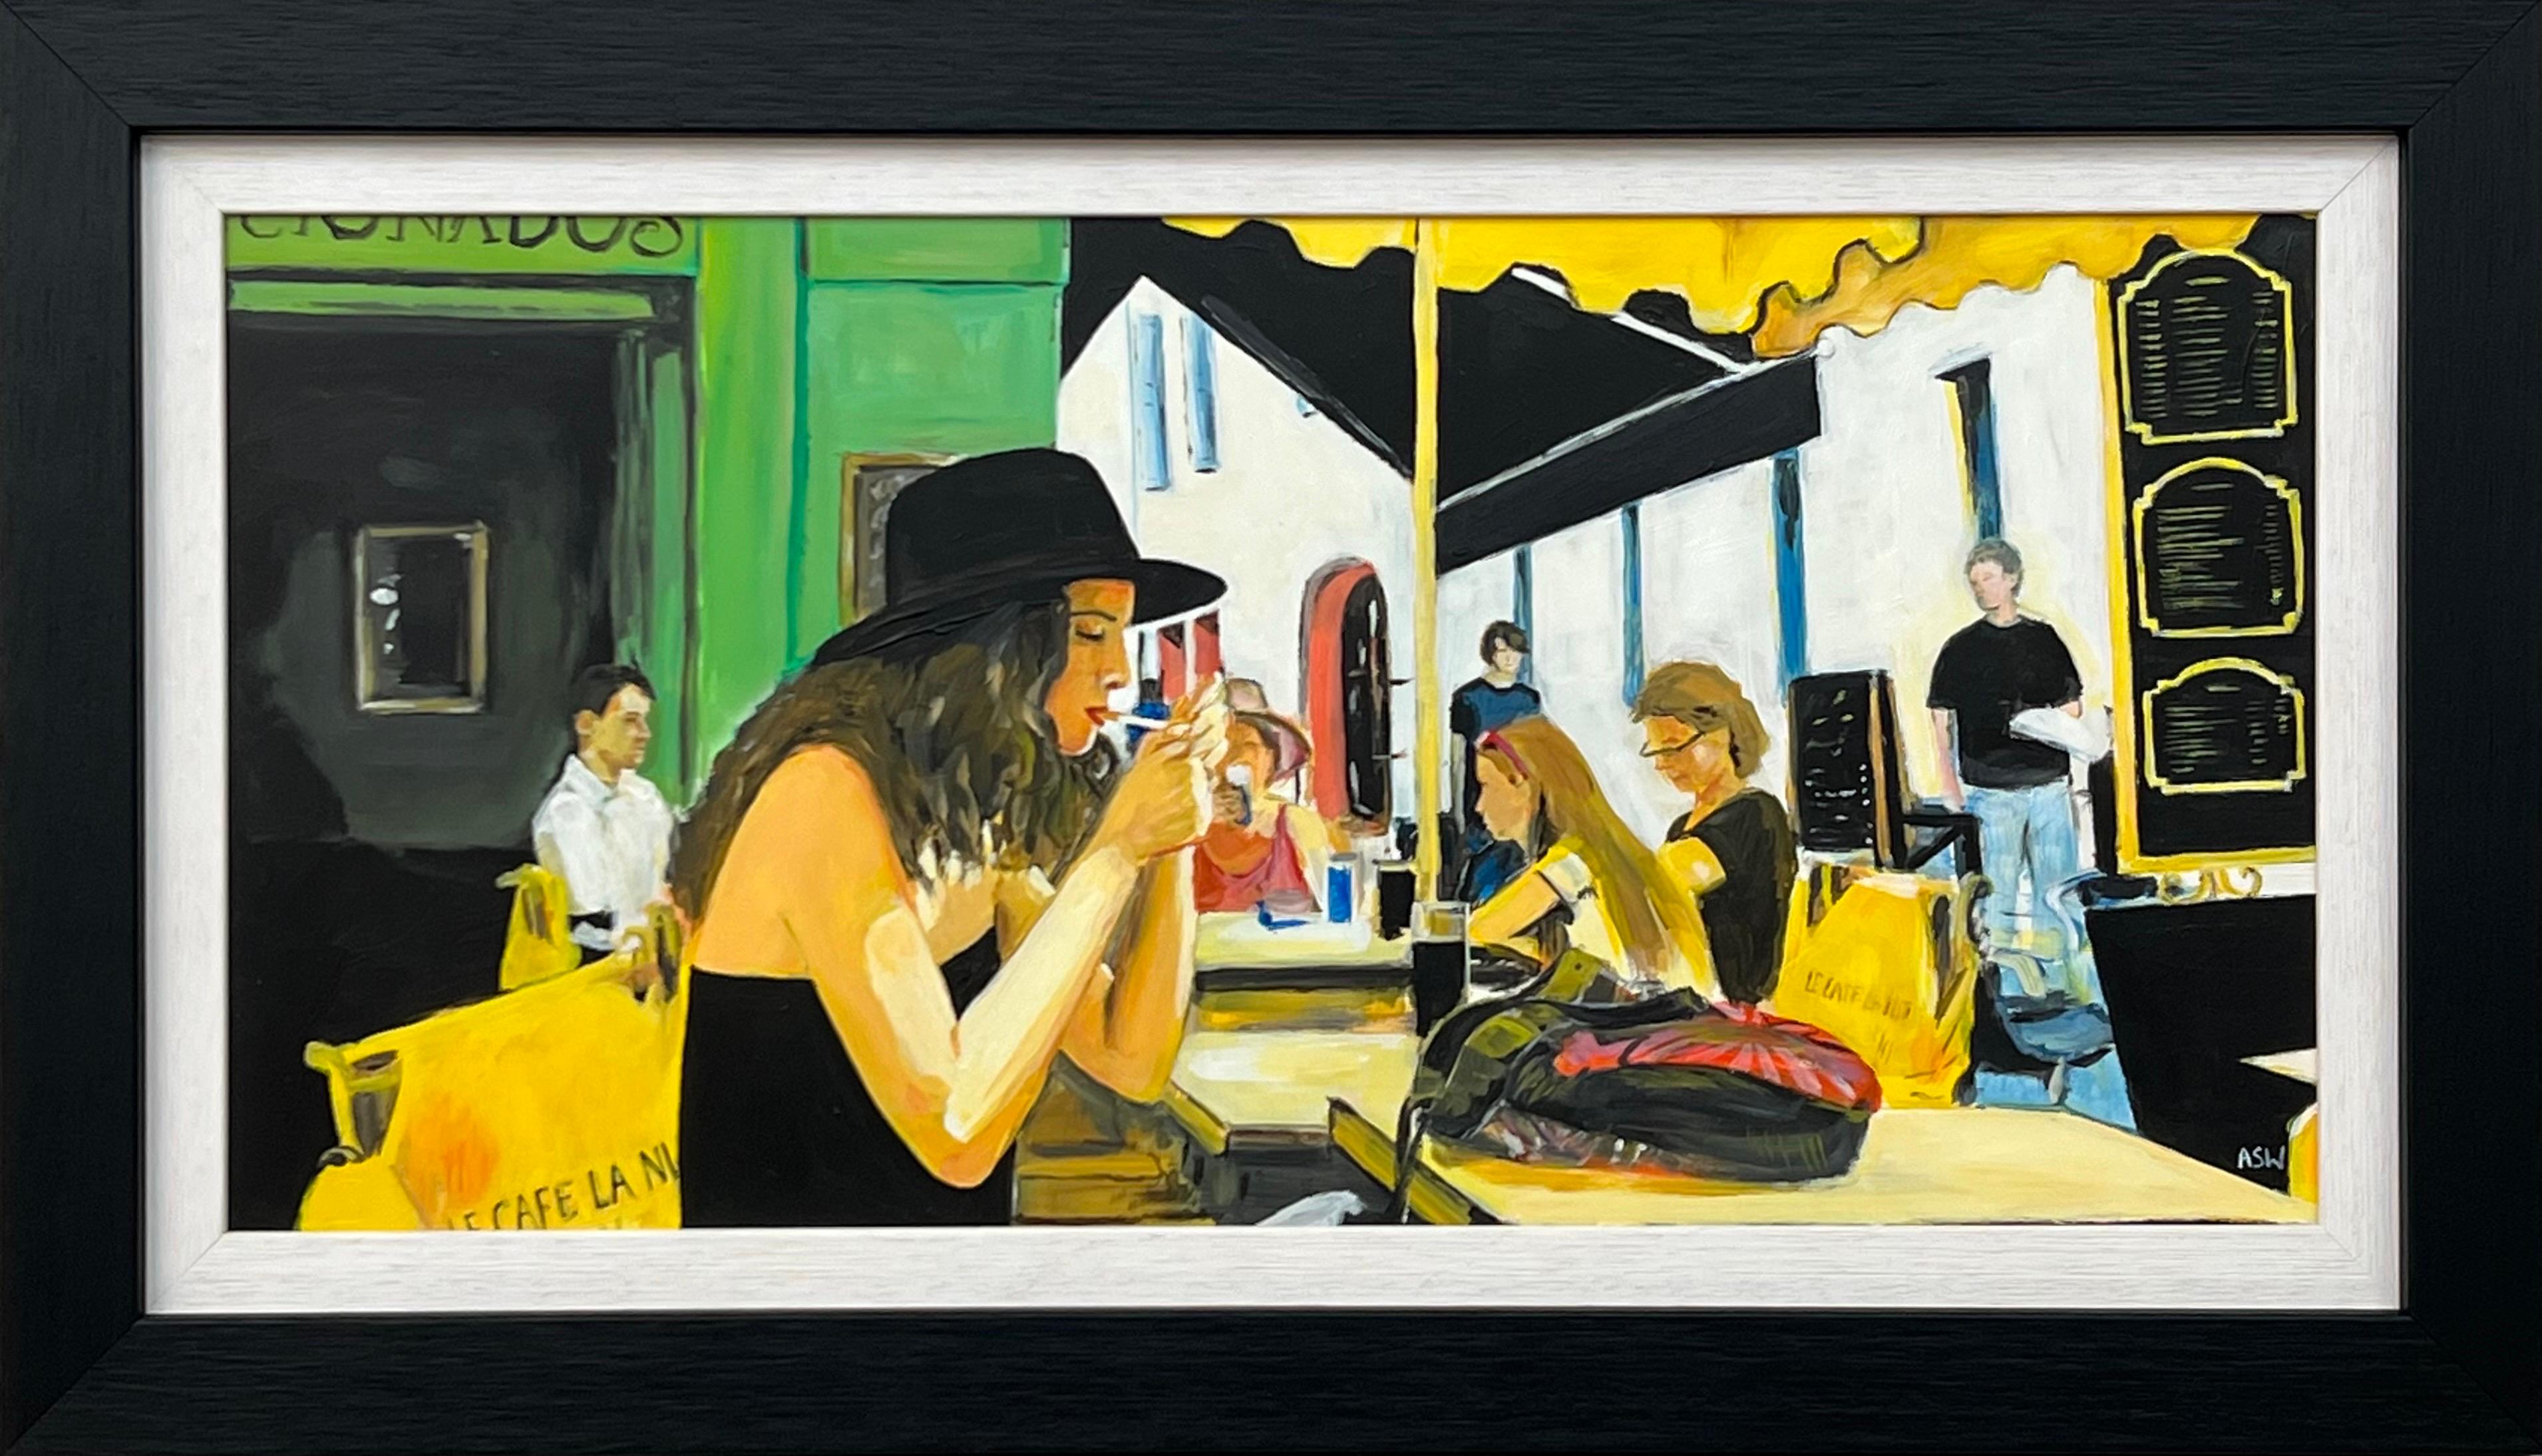 Woman Smoking at Le Cafe La Nuit in Arles, France by Contemporary British Artist